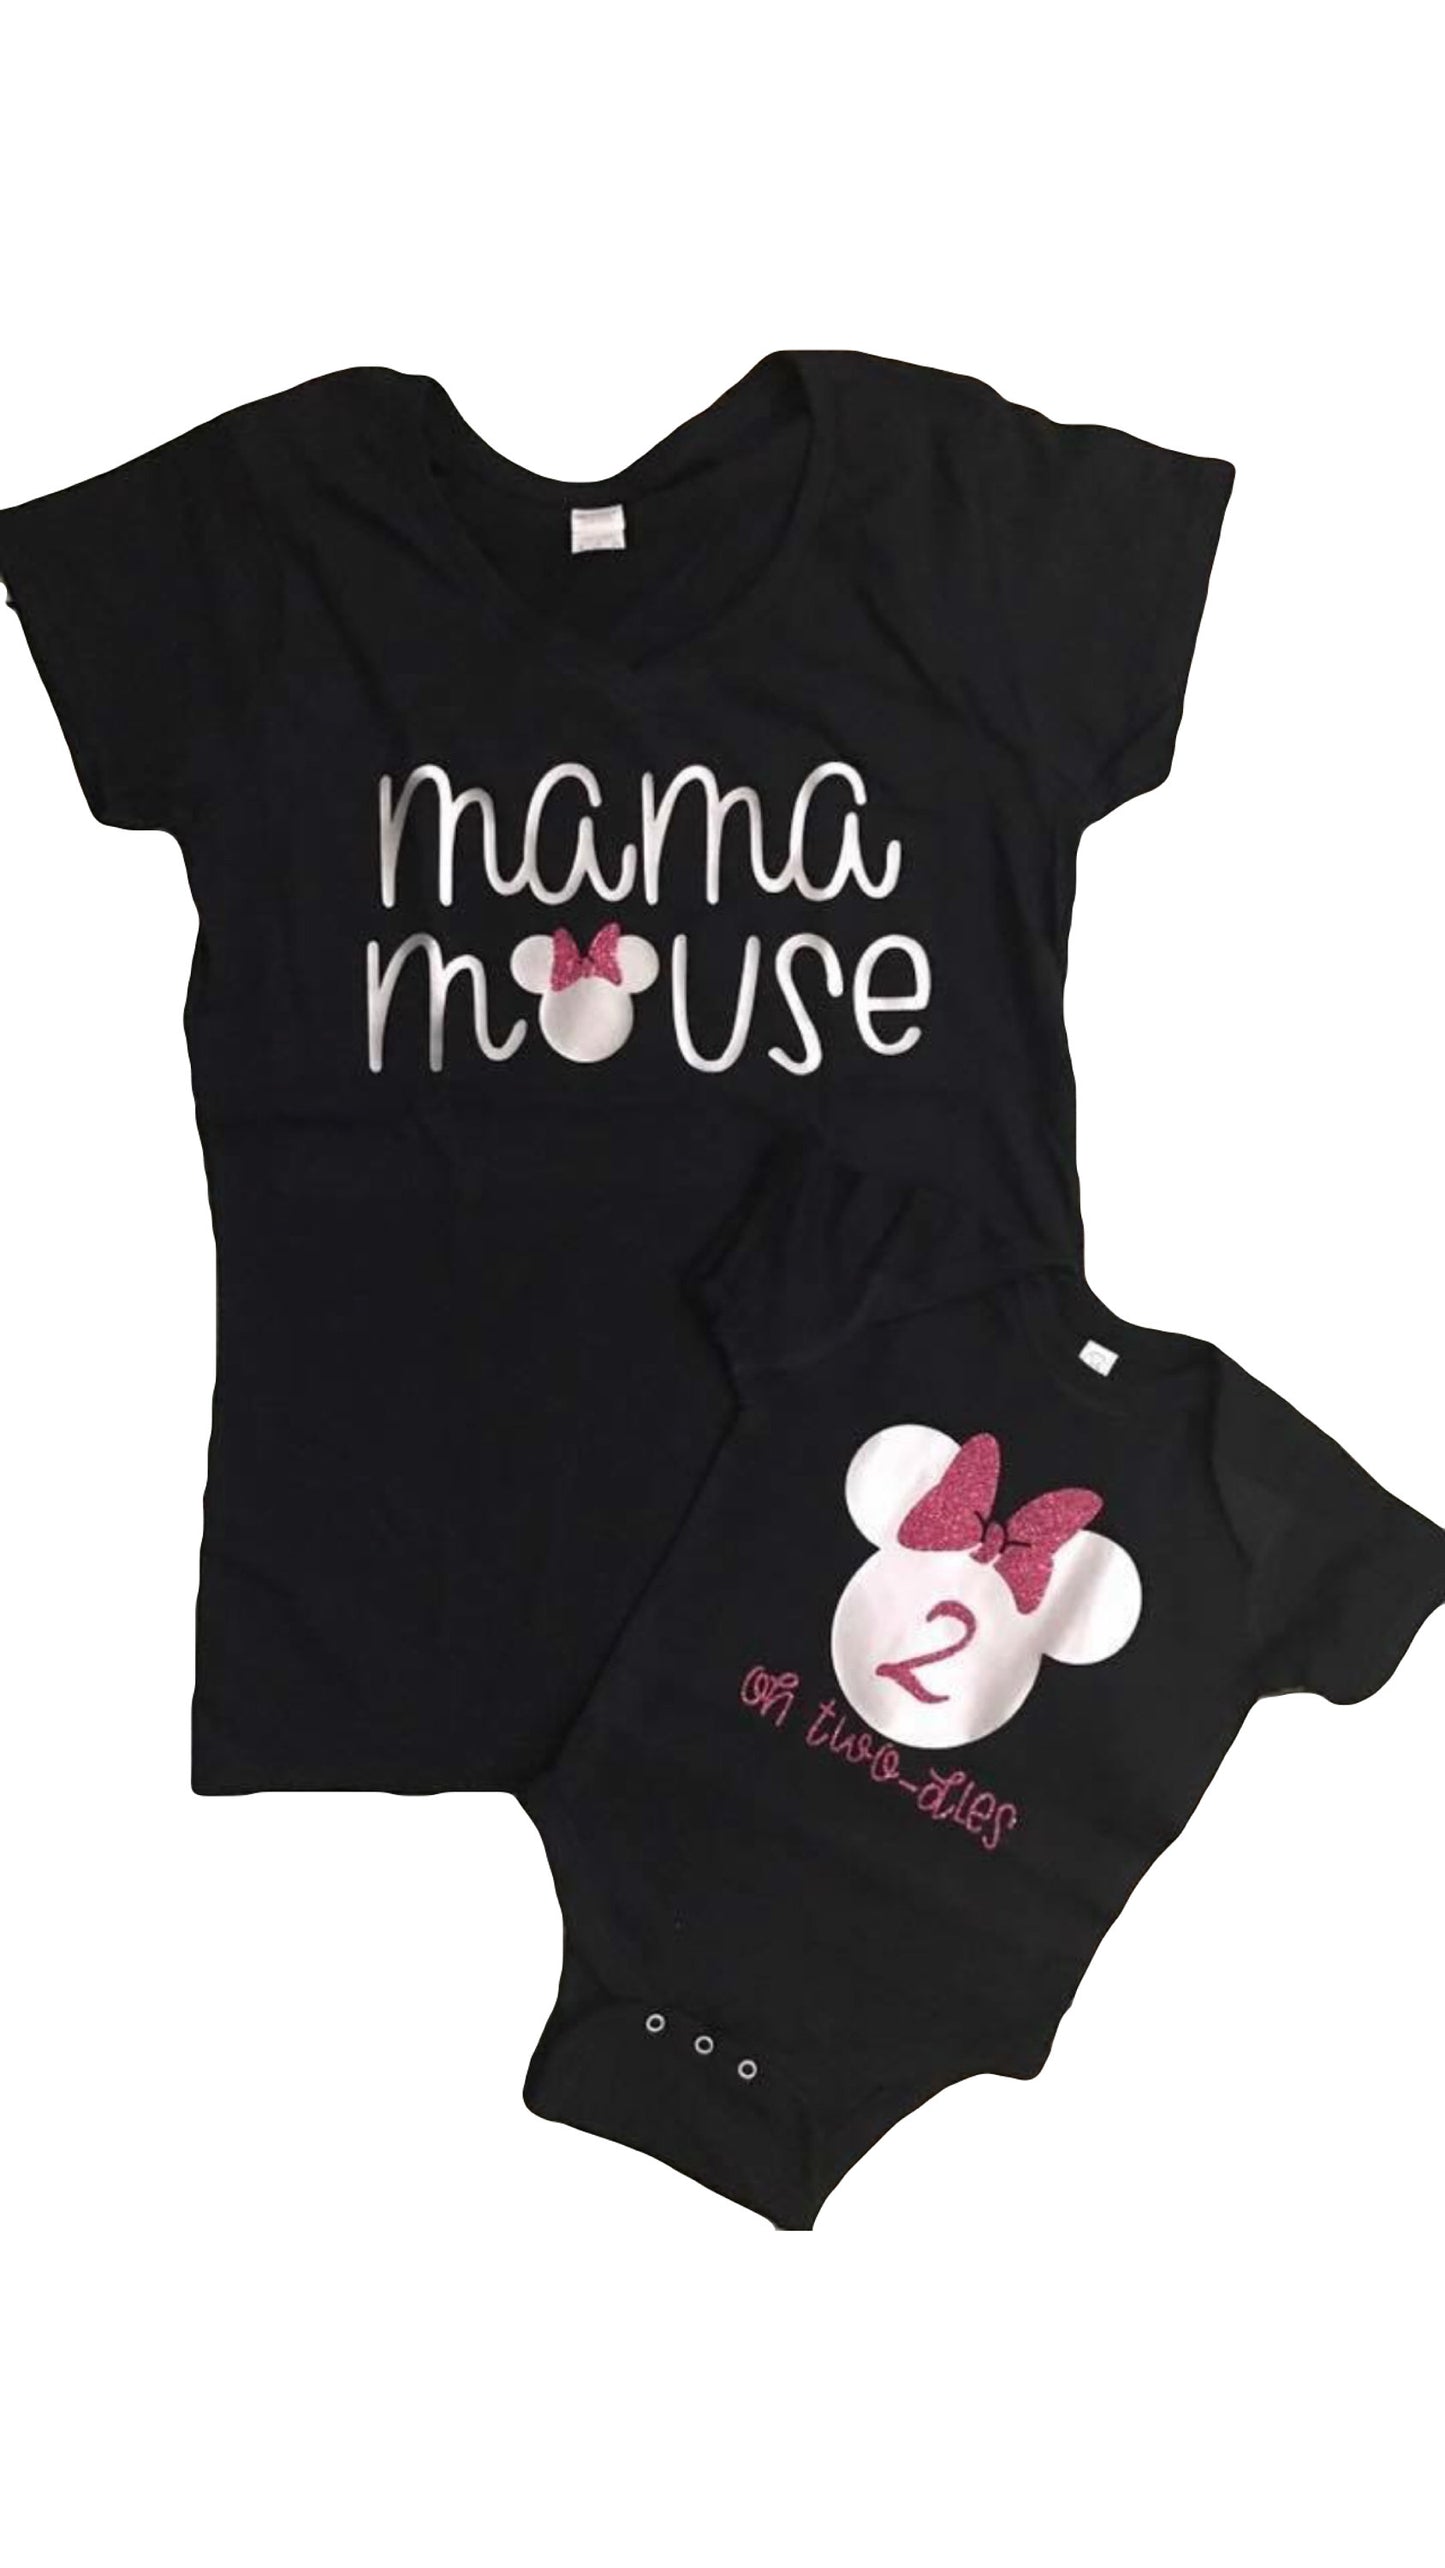 Mama mouse and baby mouse shirts, matching mommy and me shirts, mama bear shirt, mama and baby shirts, matching family shirts, mom  matching